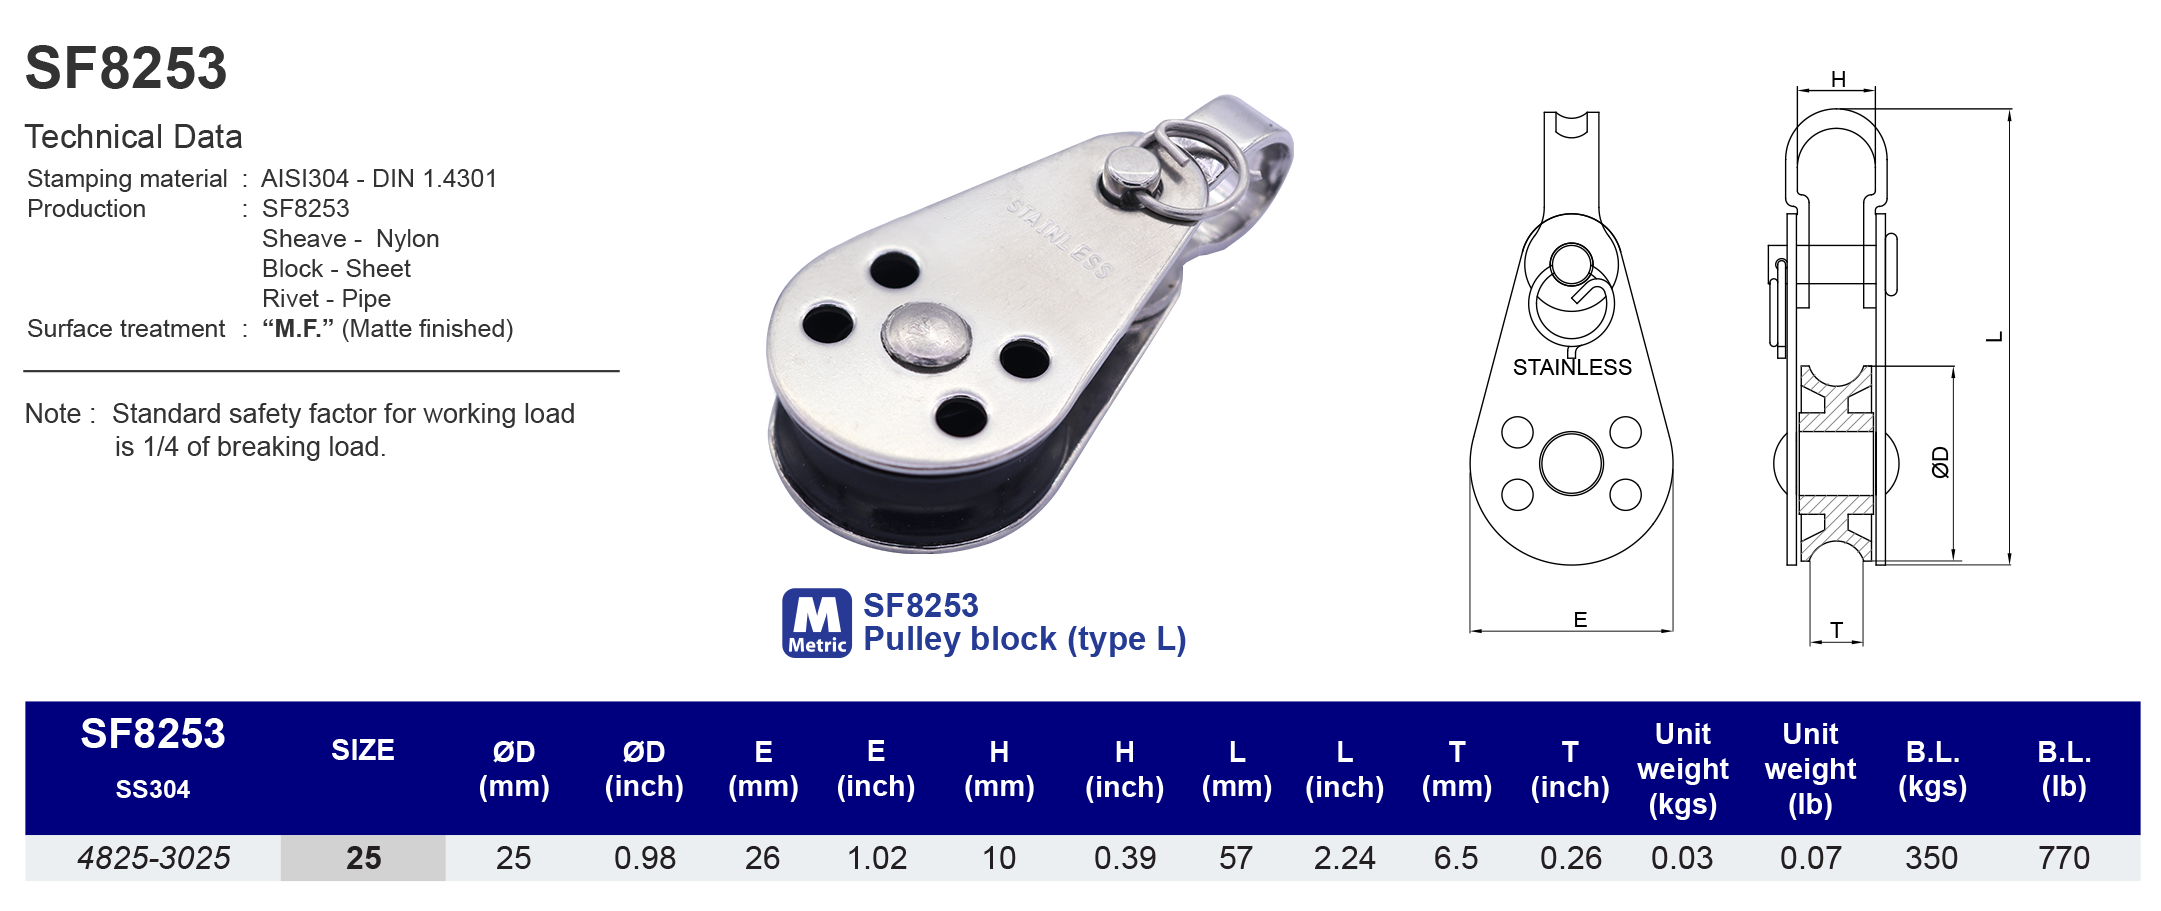 SF8253 Pulley block (type L) - 304